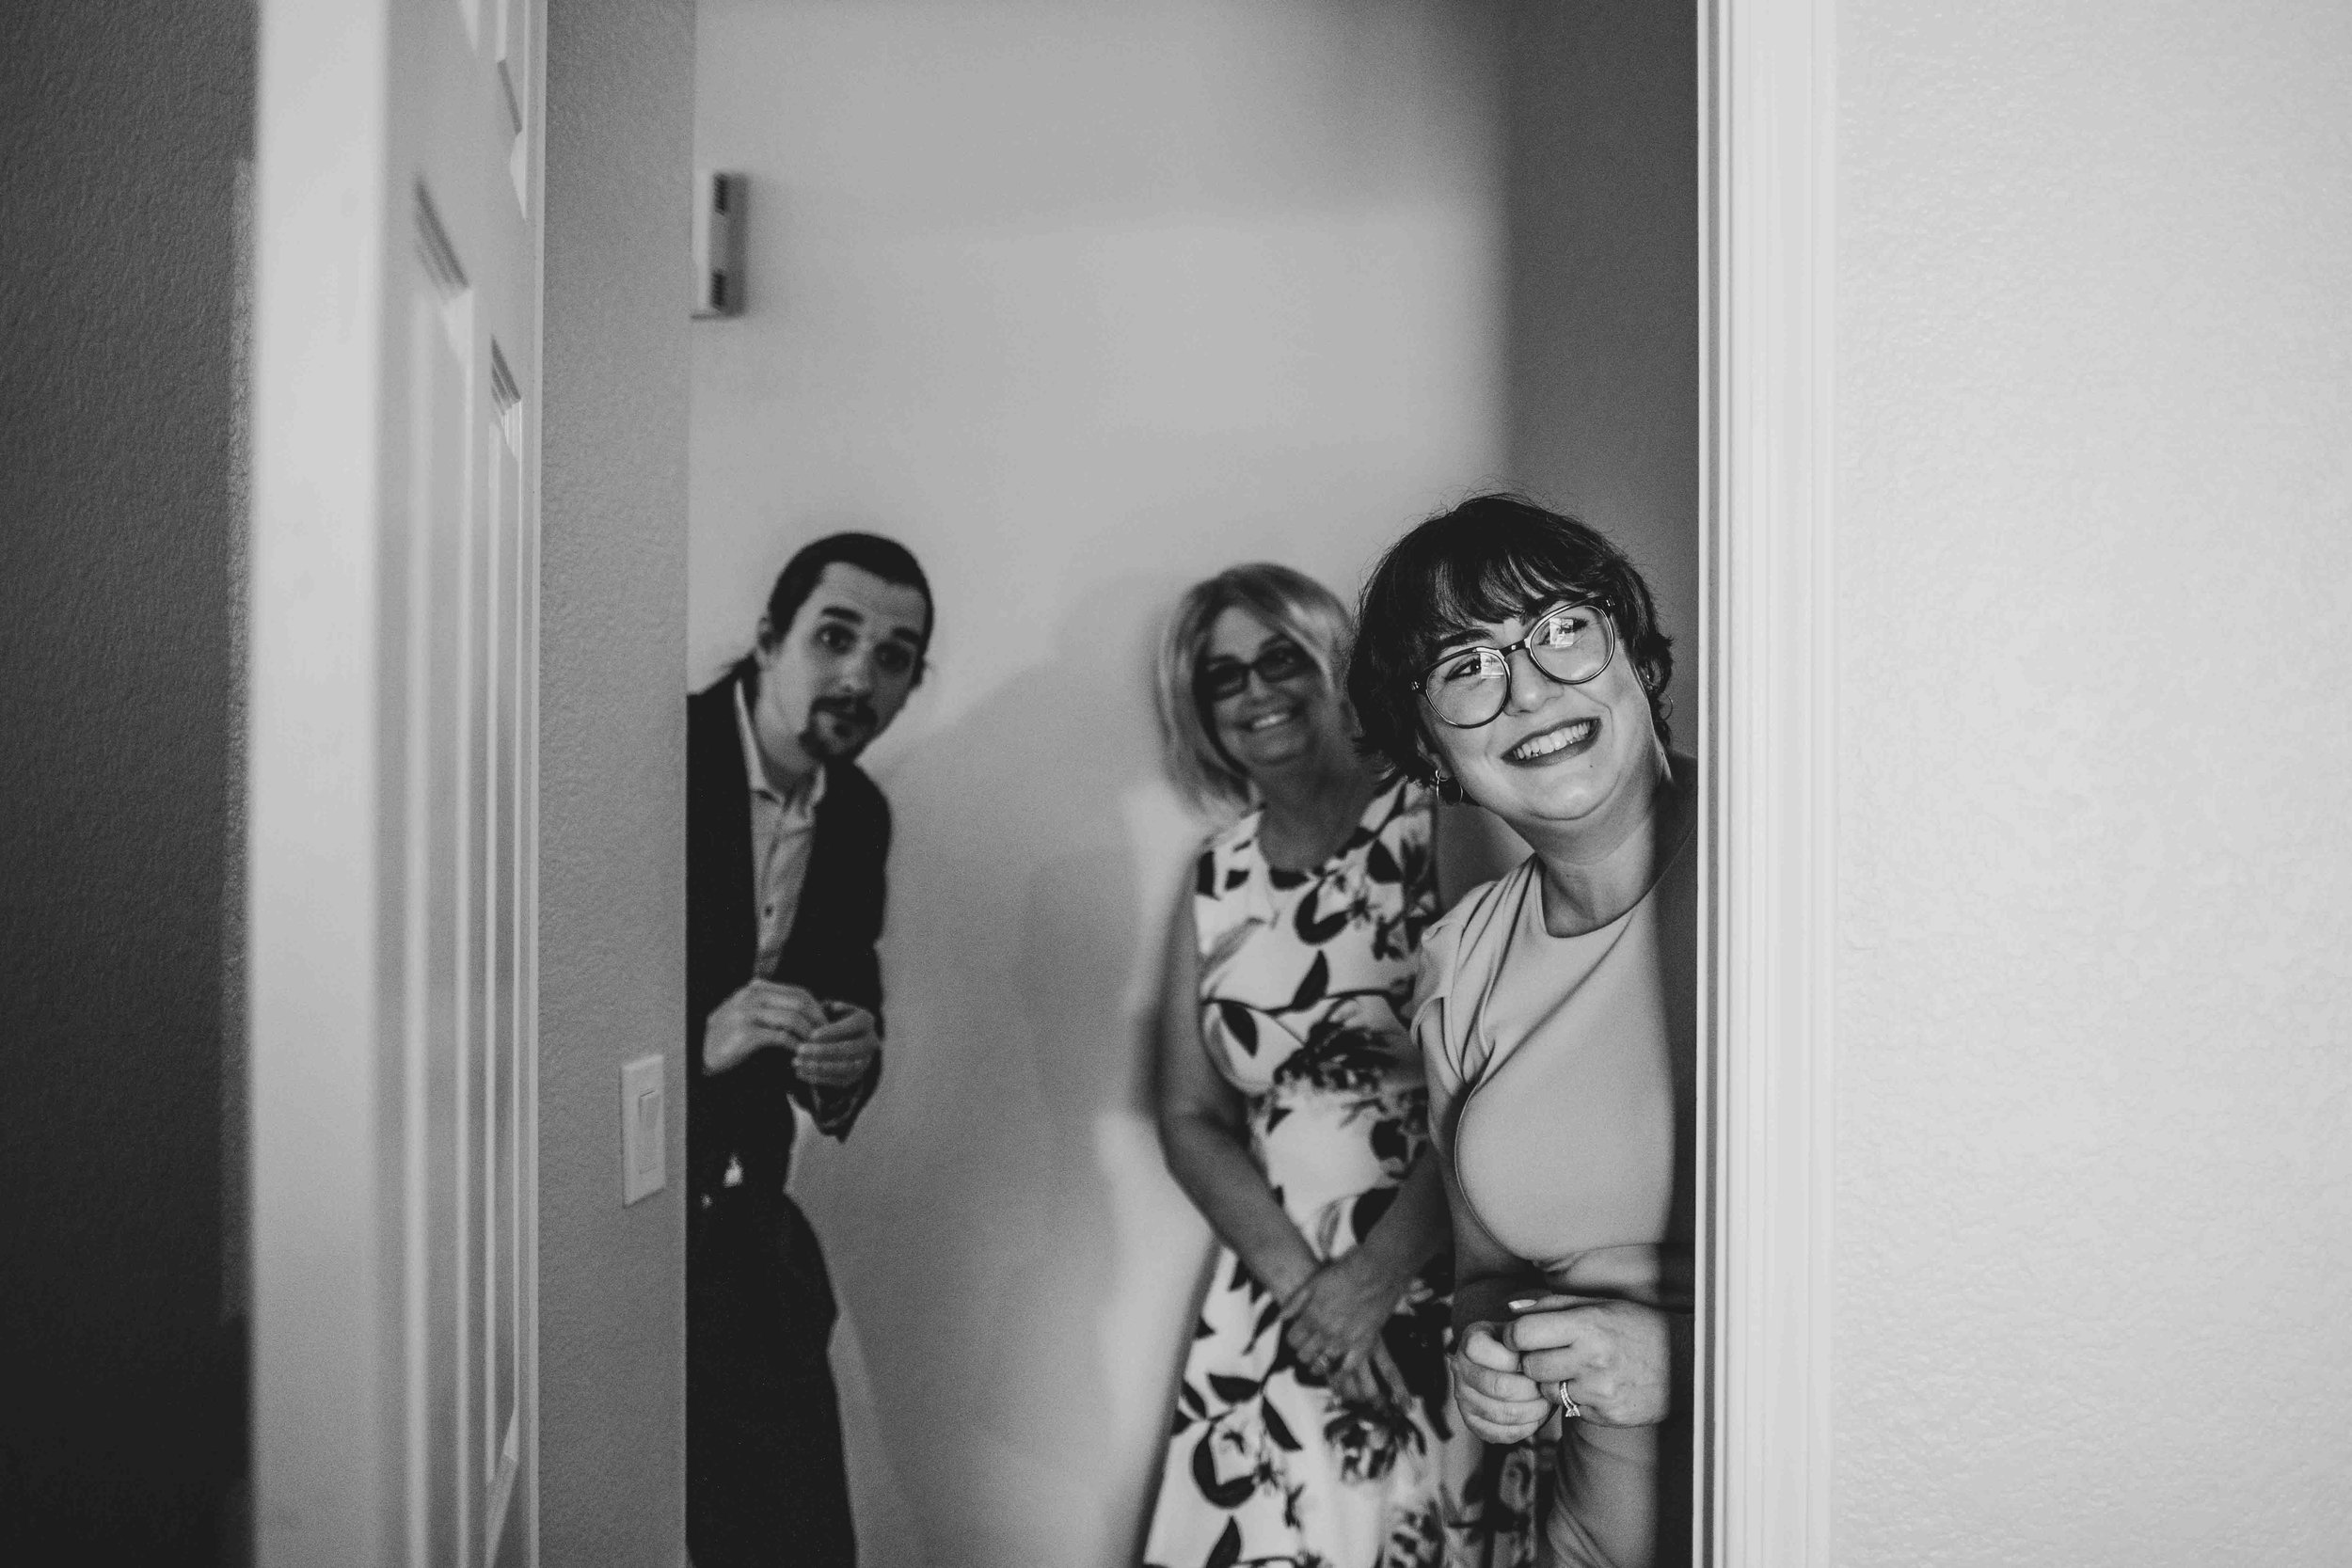  Family and friends watch Bride and Groom getting ready together for their wedding day at home by Gilbert Wedding Photographer Jennifer Lind Schutsky. 